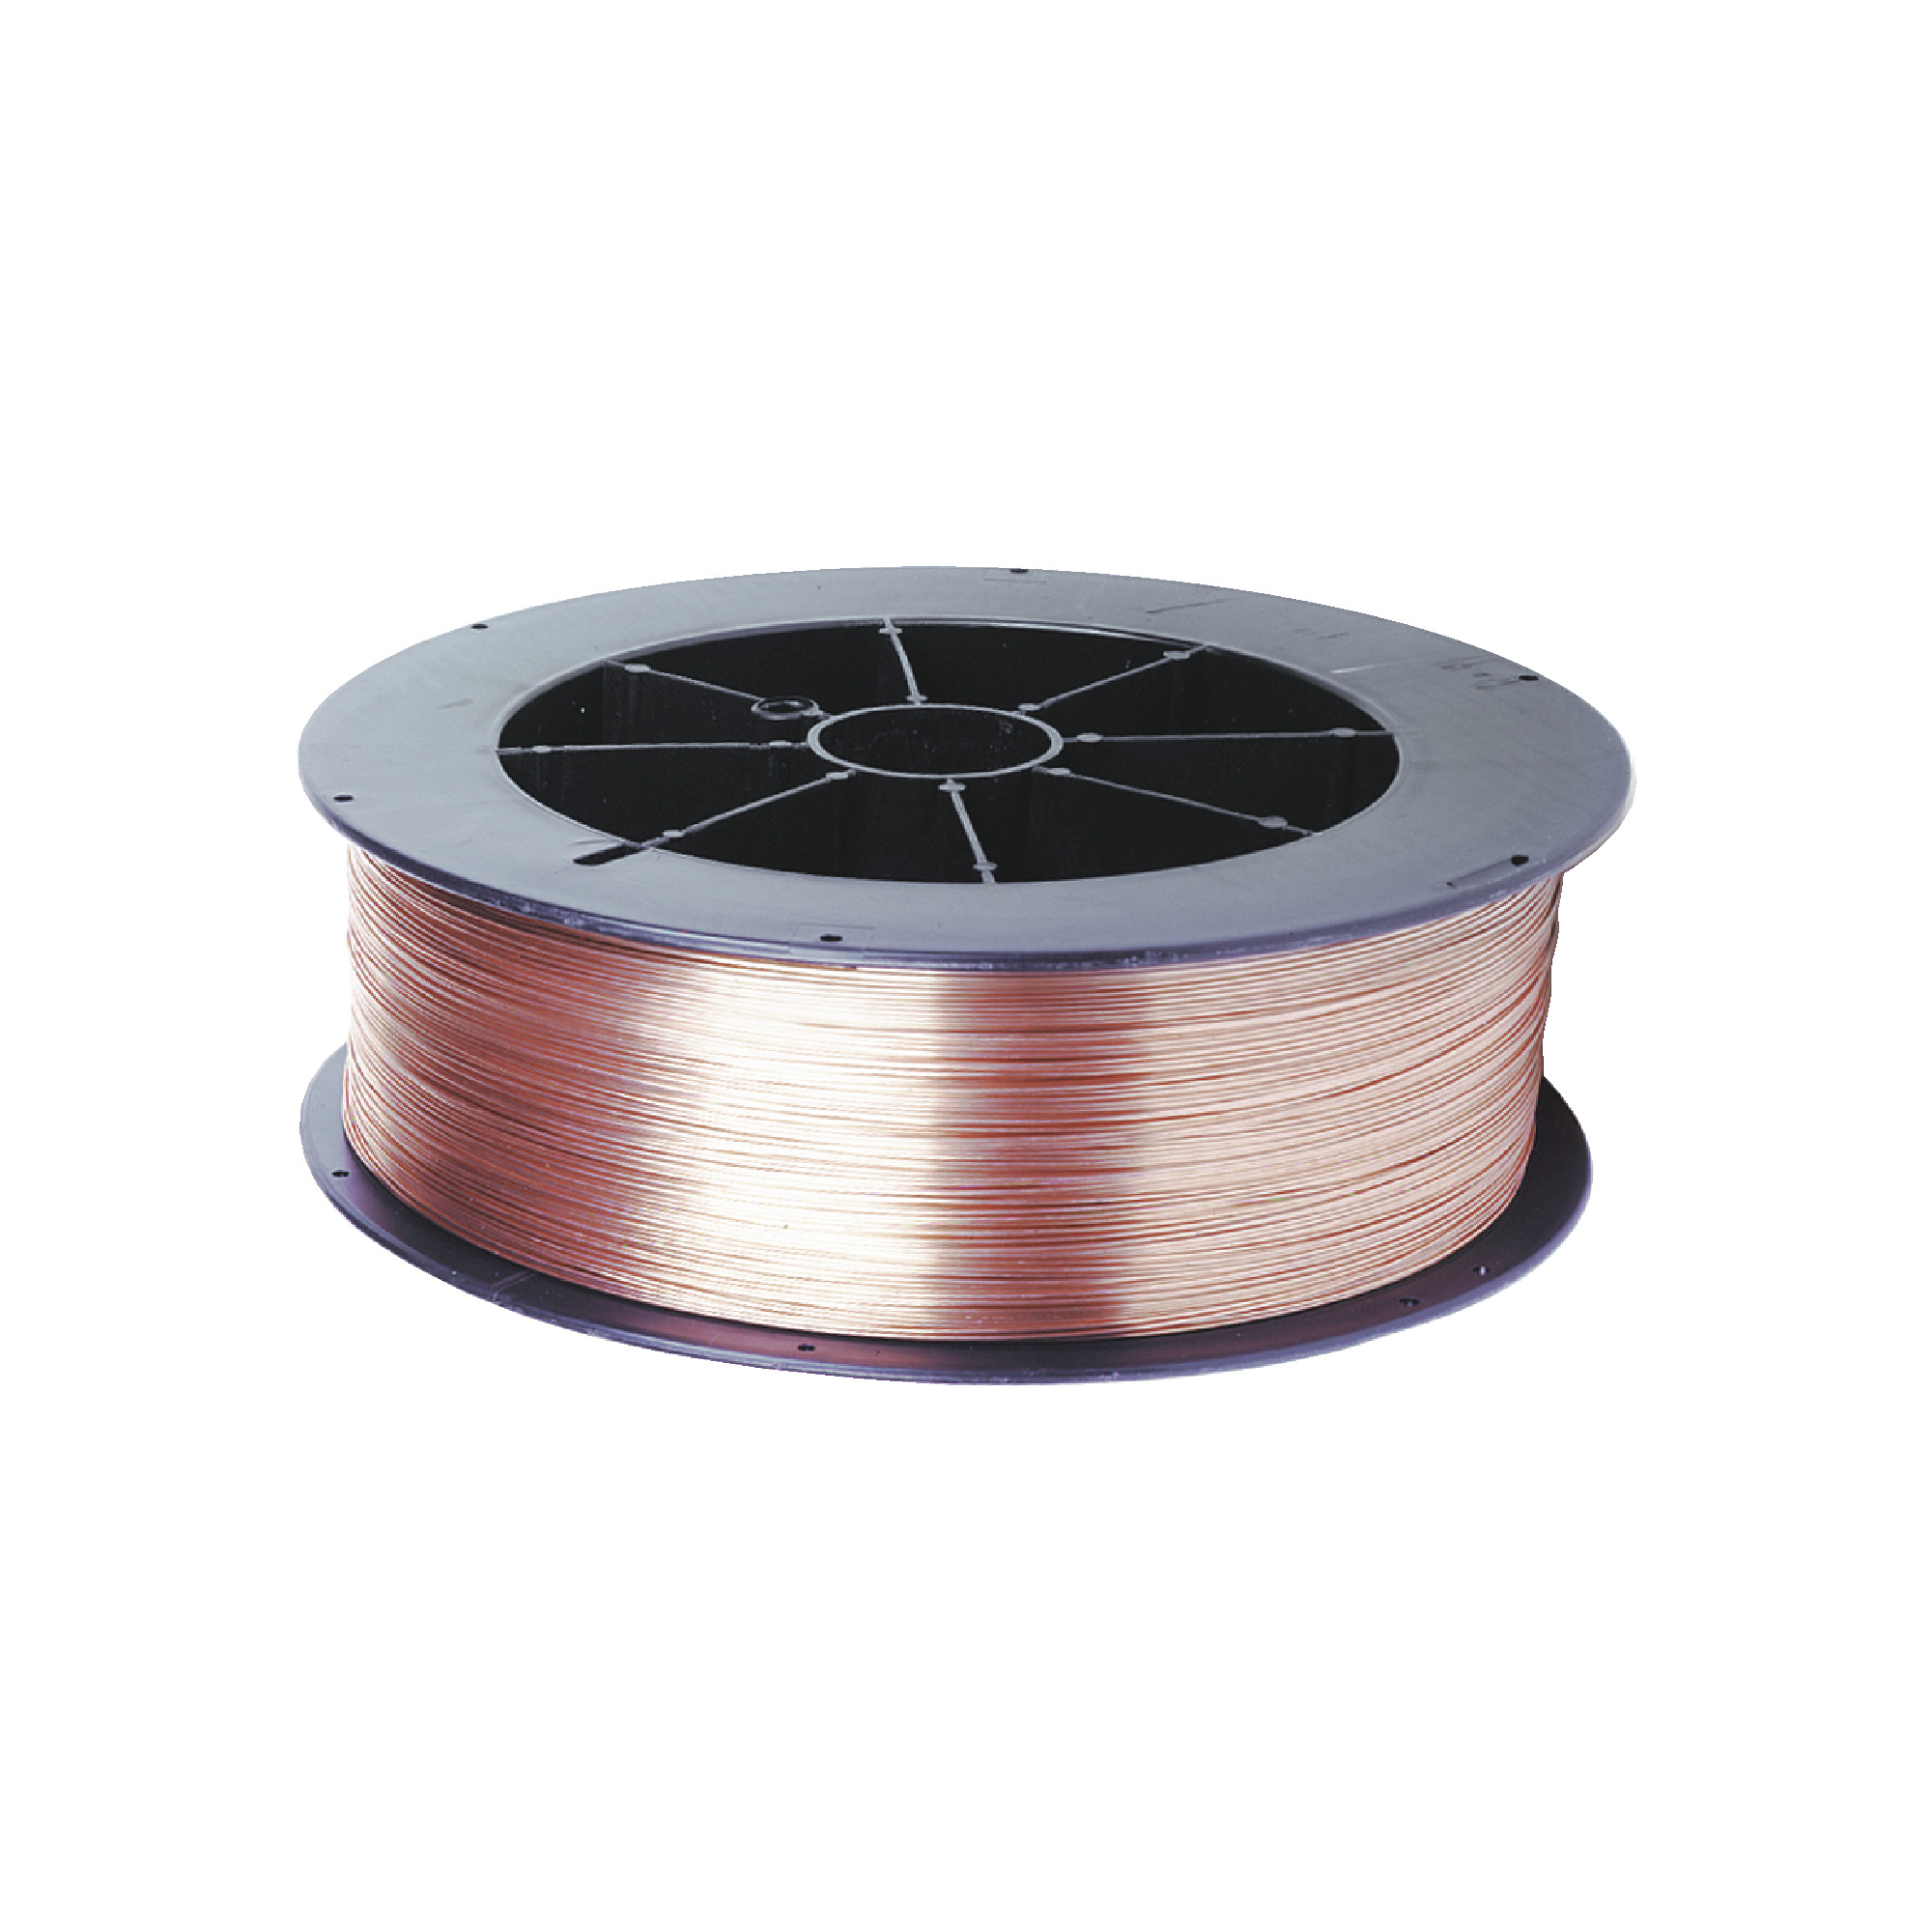 .035" ER70S-6 Super Arc L-56 Copper Coated Carbon Steel MIG Welding Wire - 2 lbs. Spool